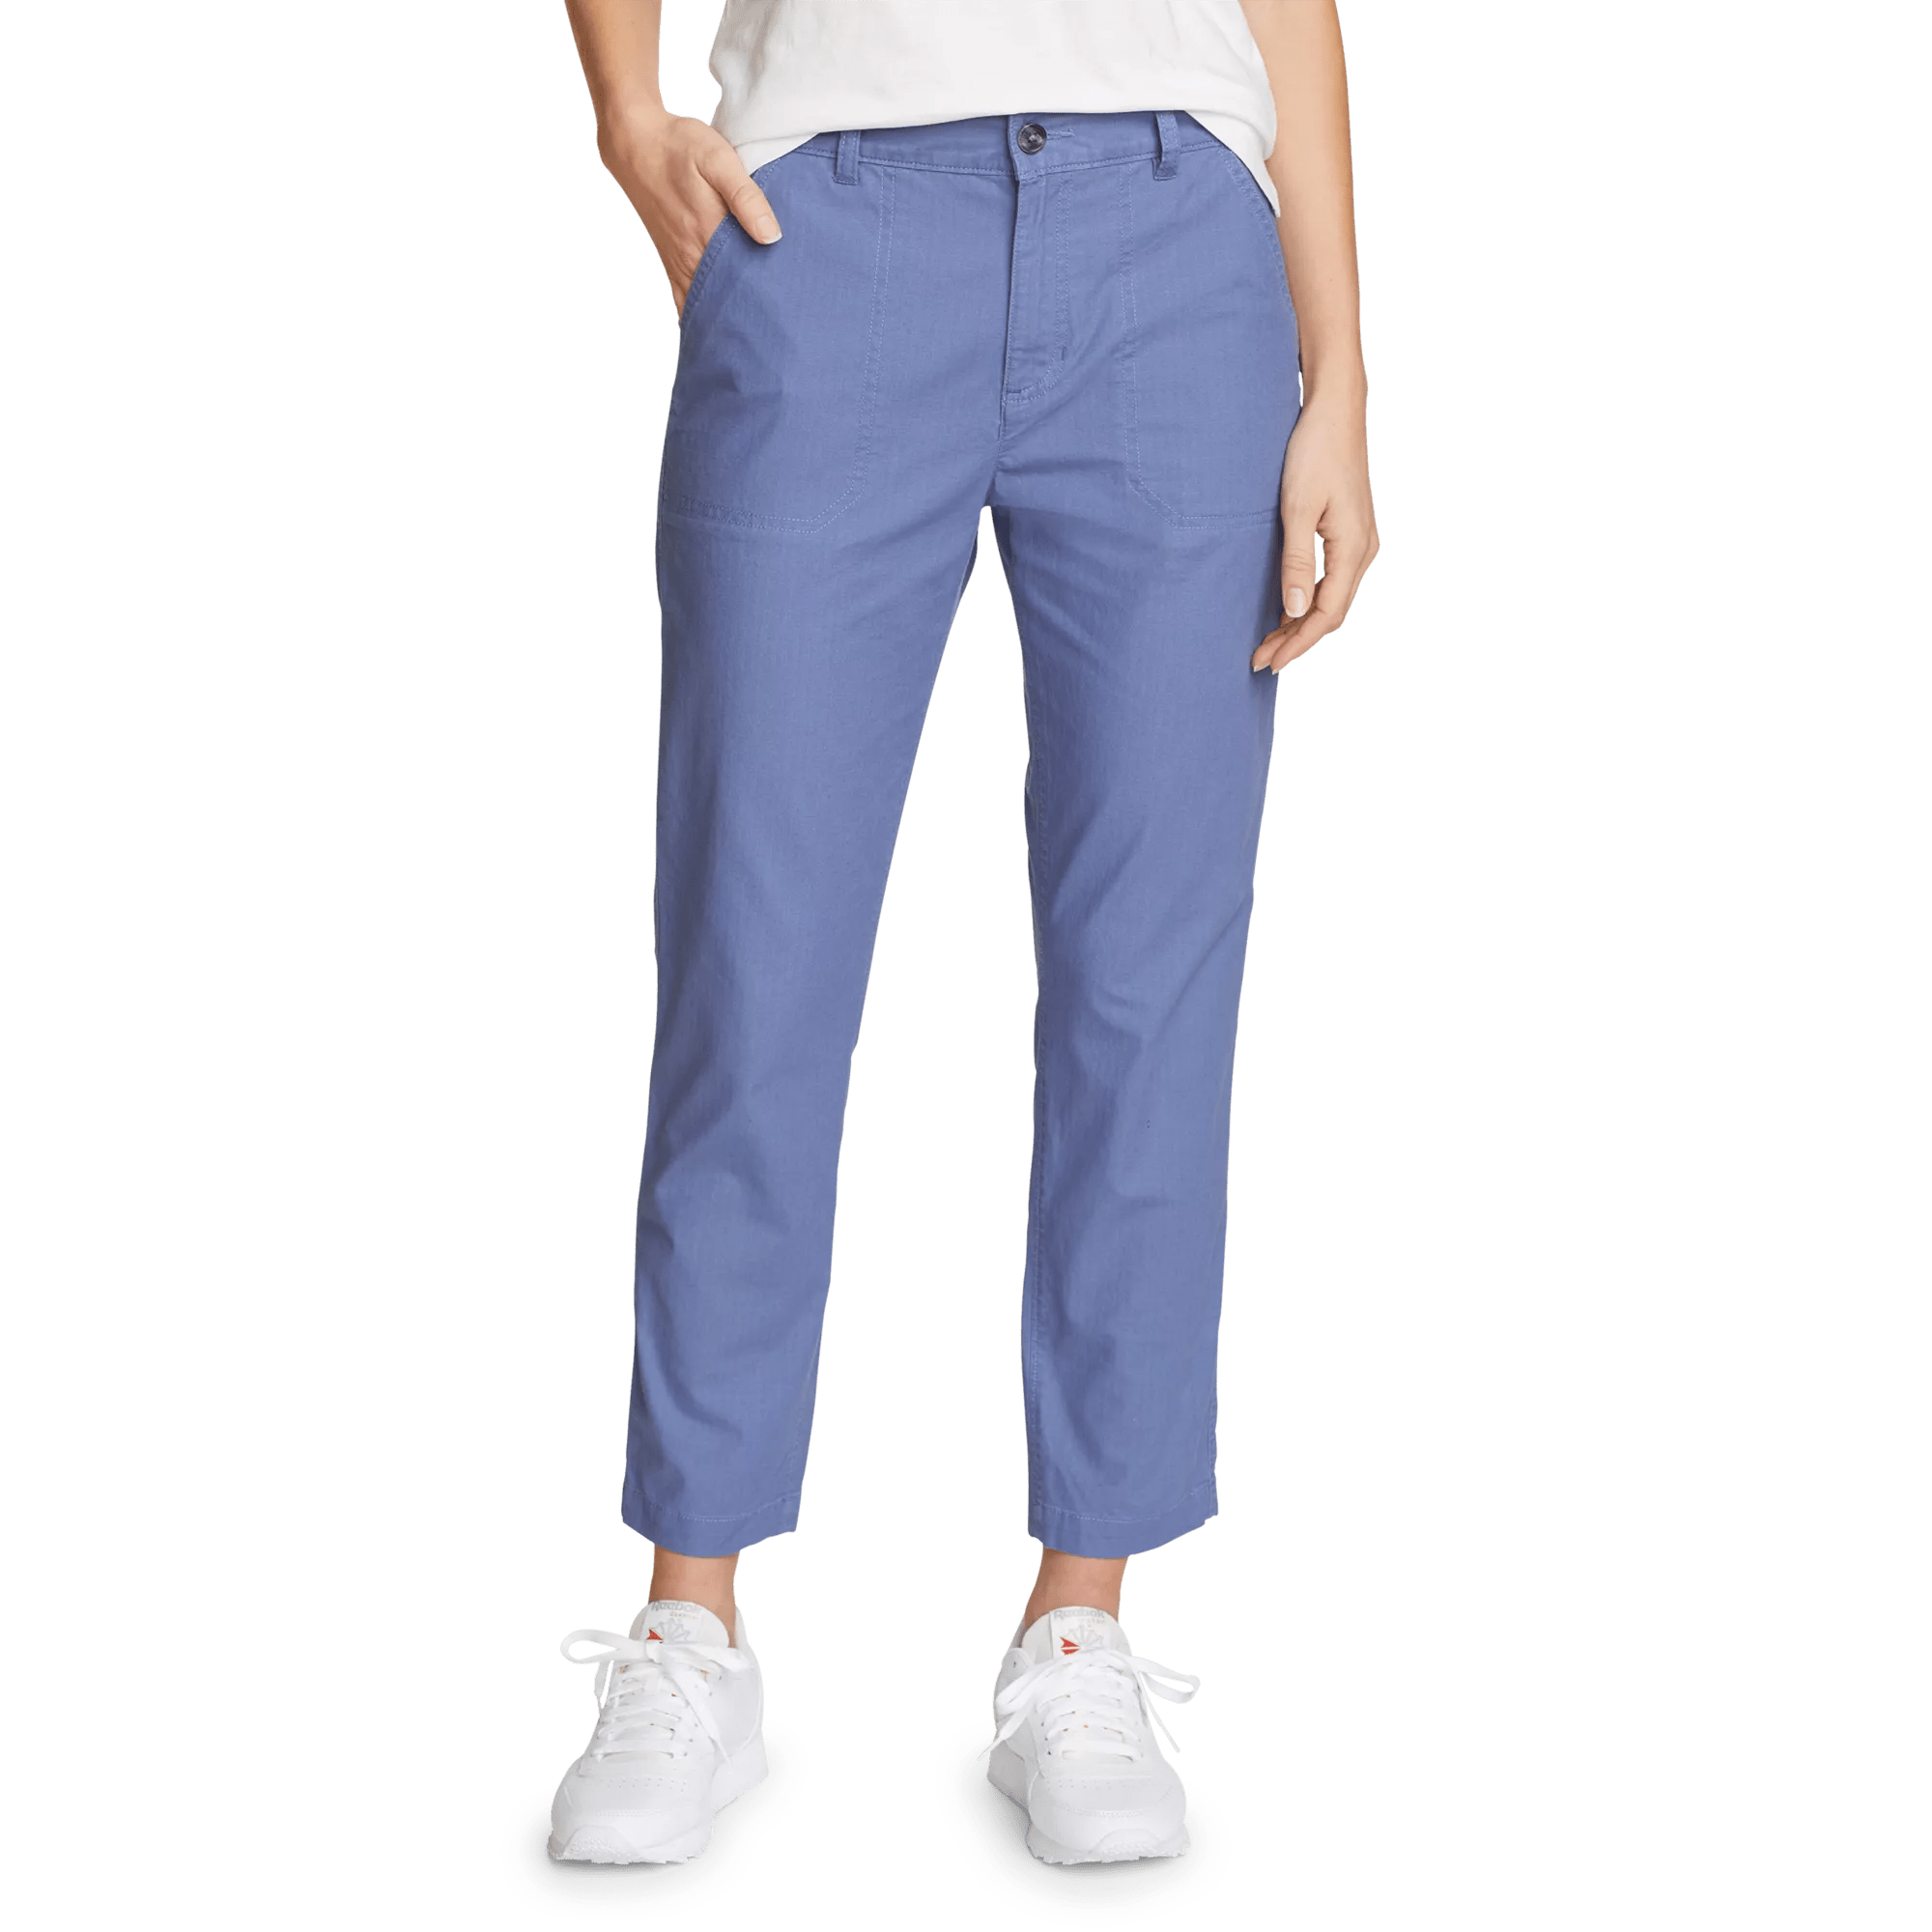 Adventurer® Stretch Ripstop Ankle Pants